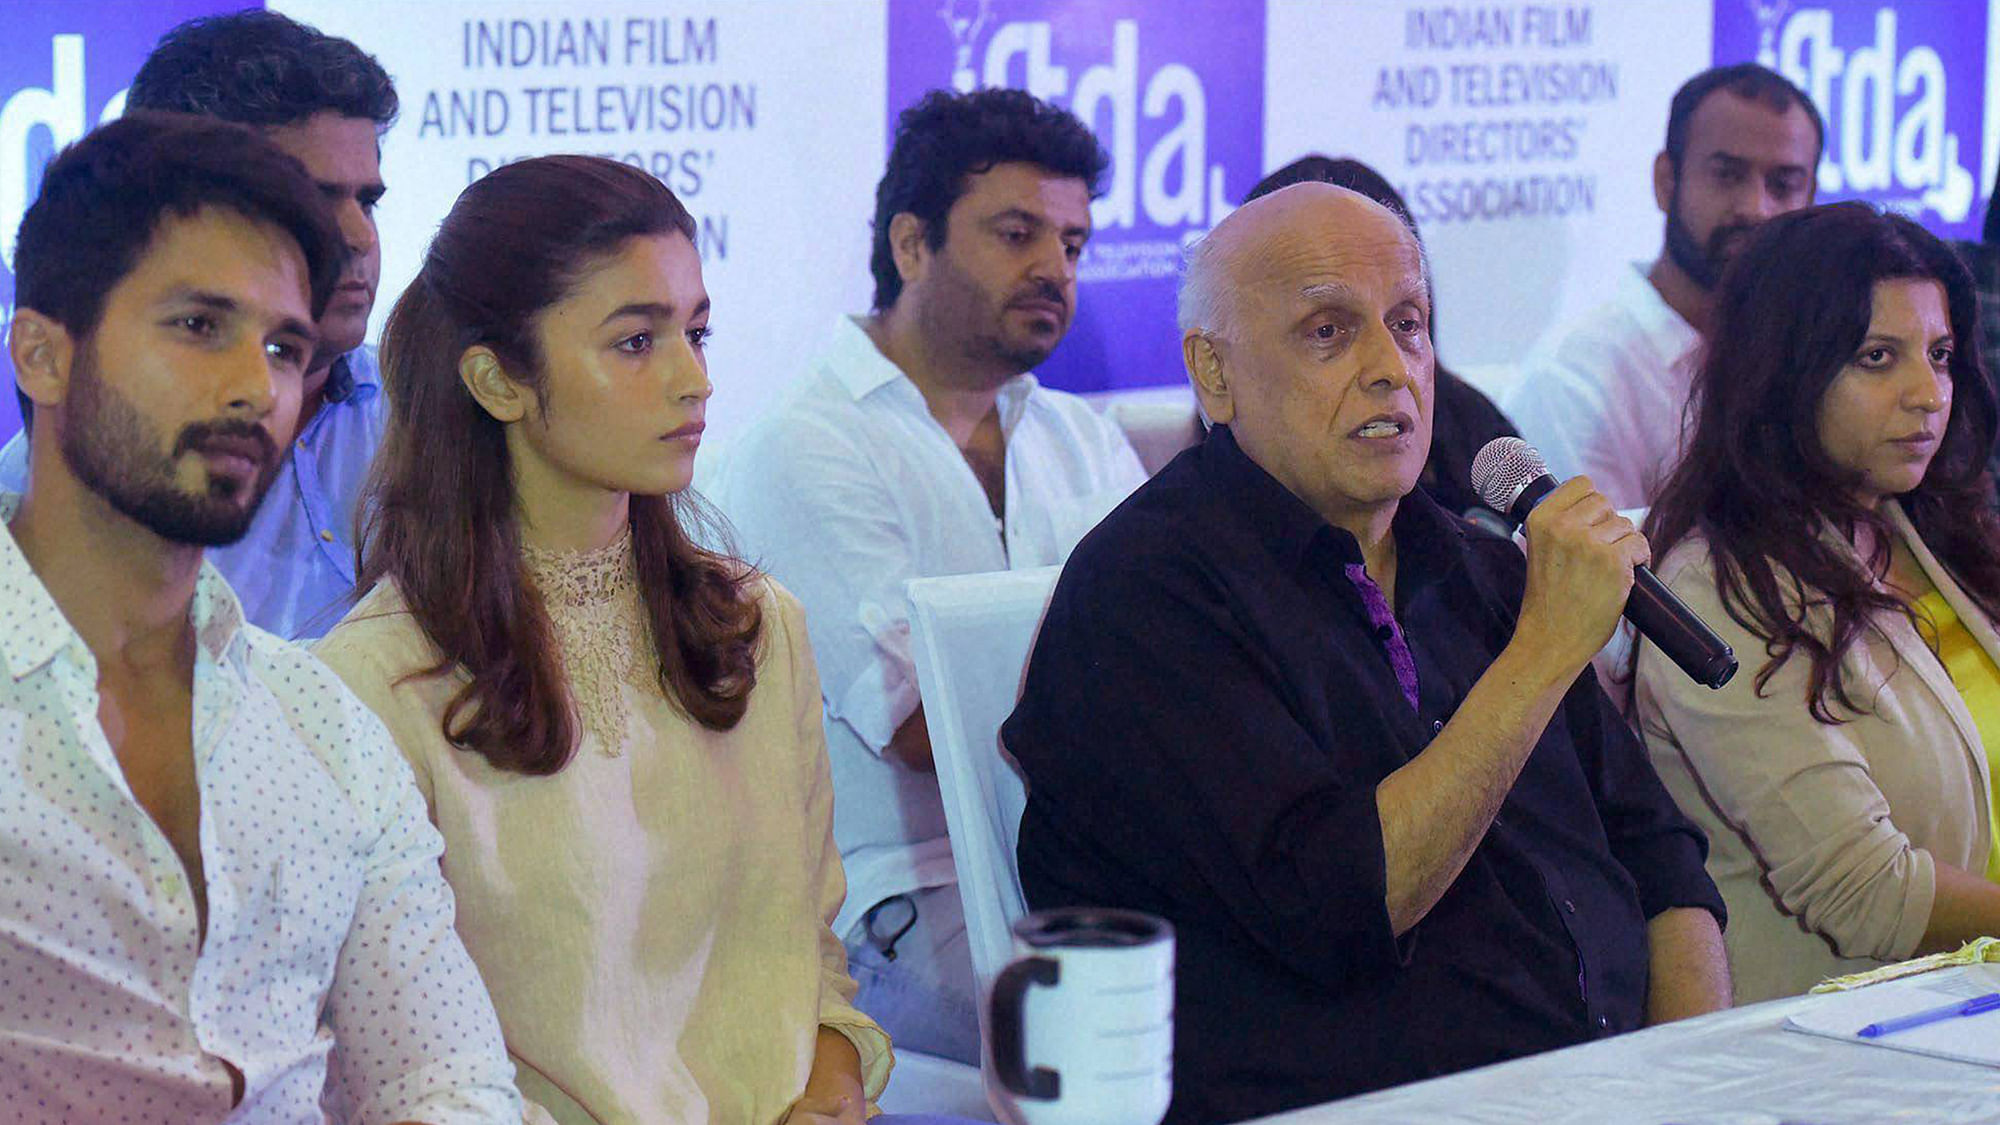 Filmmaker Mahesh Bhatt with Udta Punjab film actors Shahid Kapoor and Alia Bhatt speaks at a press conference organized by Indian Film and Television Directors Association (IFTDA) in Mumbai on Wednesday. (Photo: PTI)